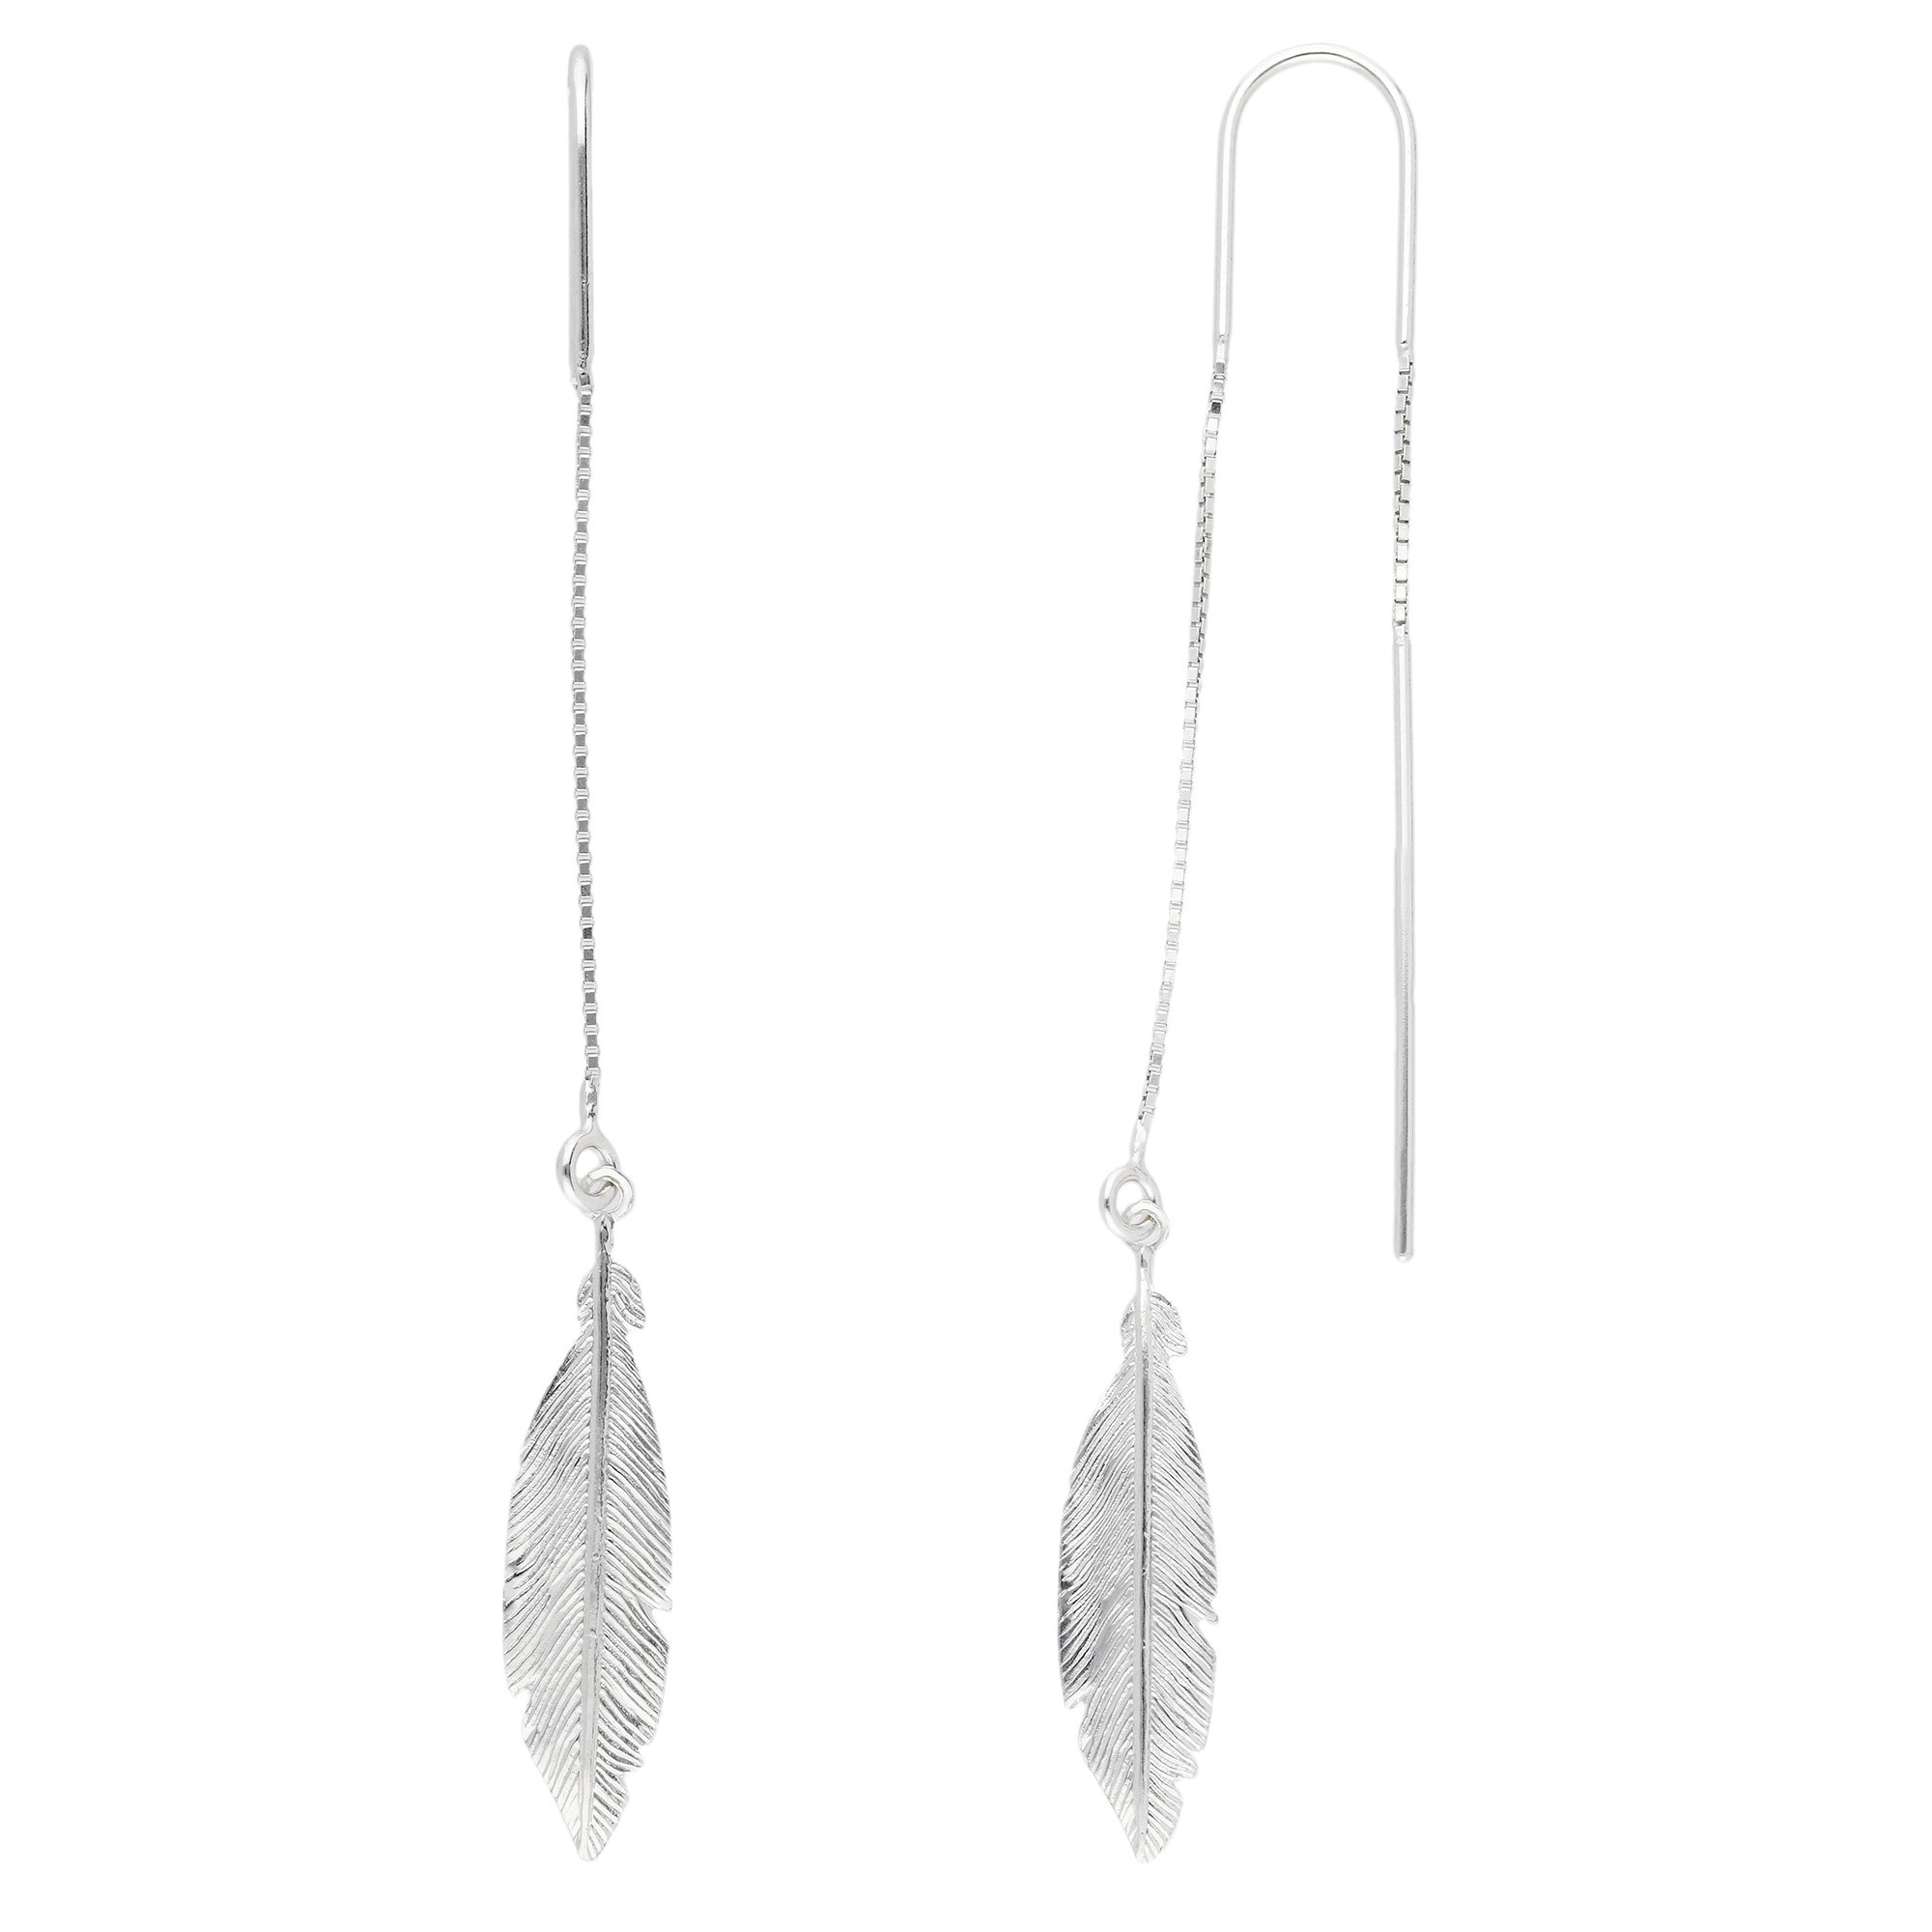 Feather Threader Chain Earrings in Sterling Silver 